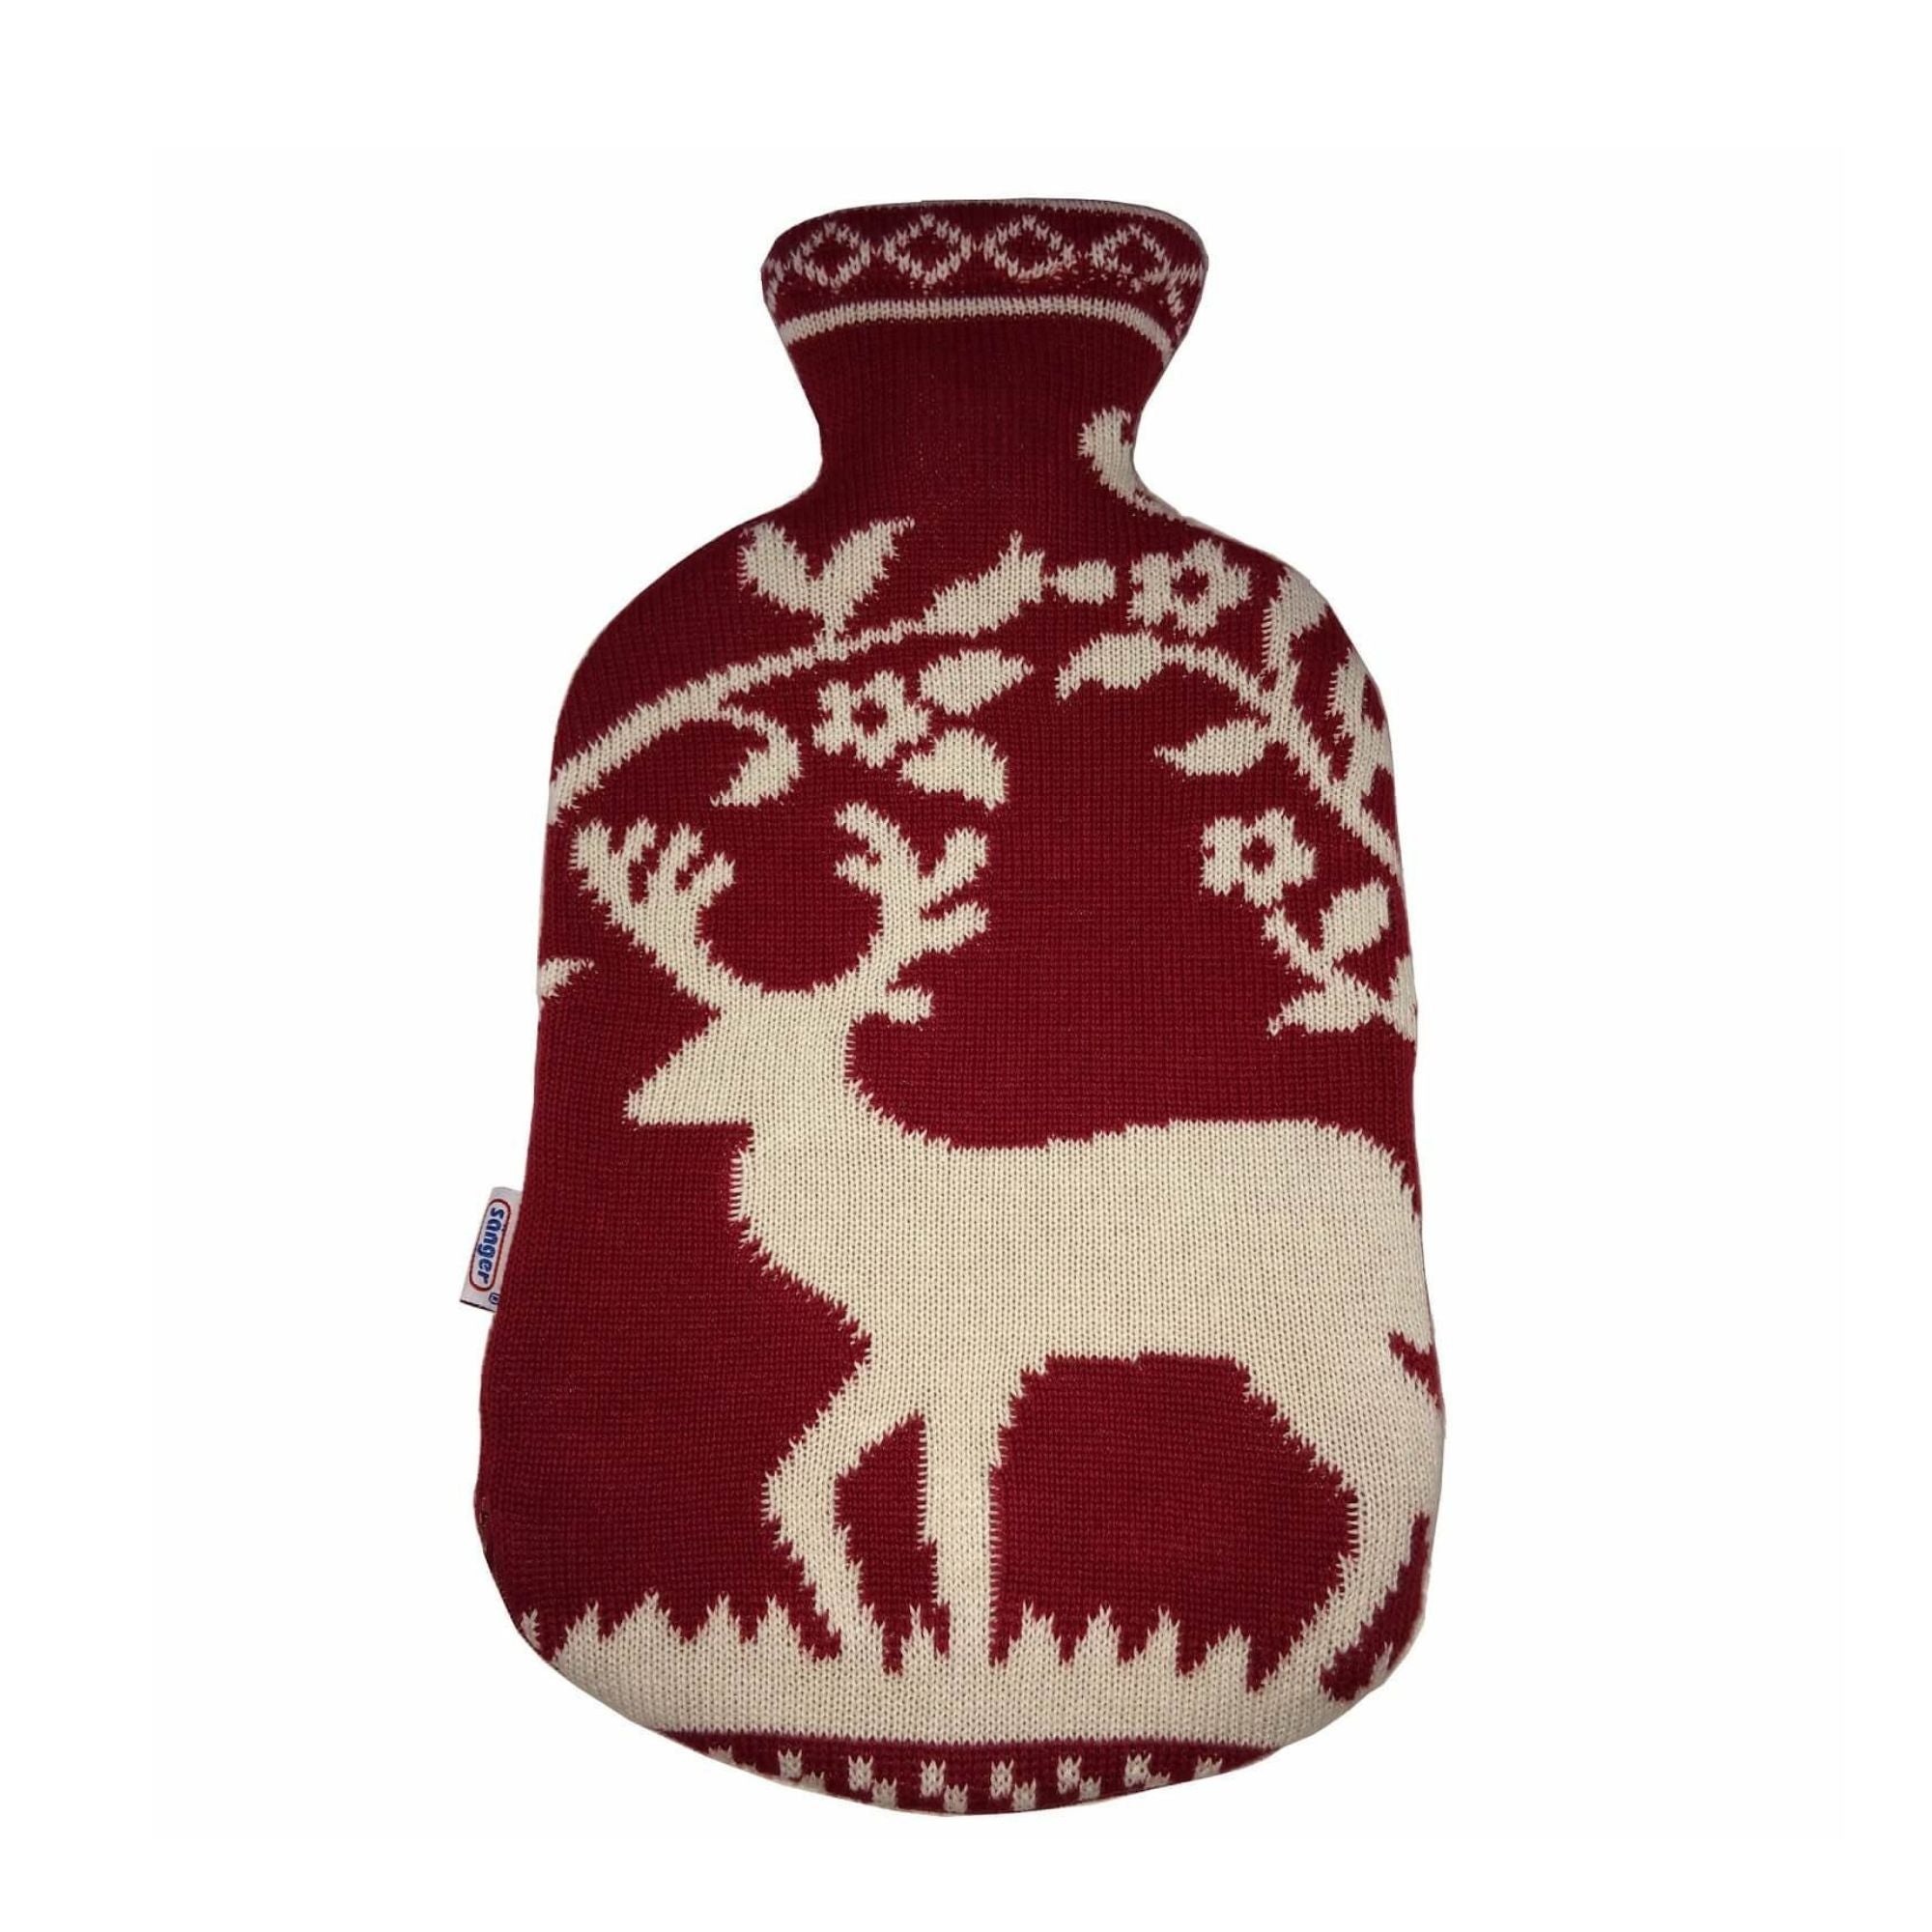 2 Litre Sanger Hot Water Bottle with Knitted Deer Cotton Cover